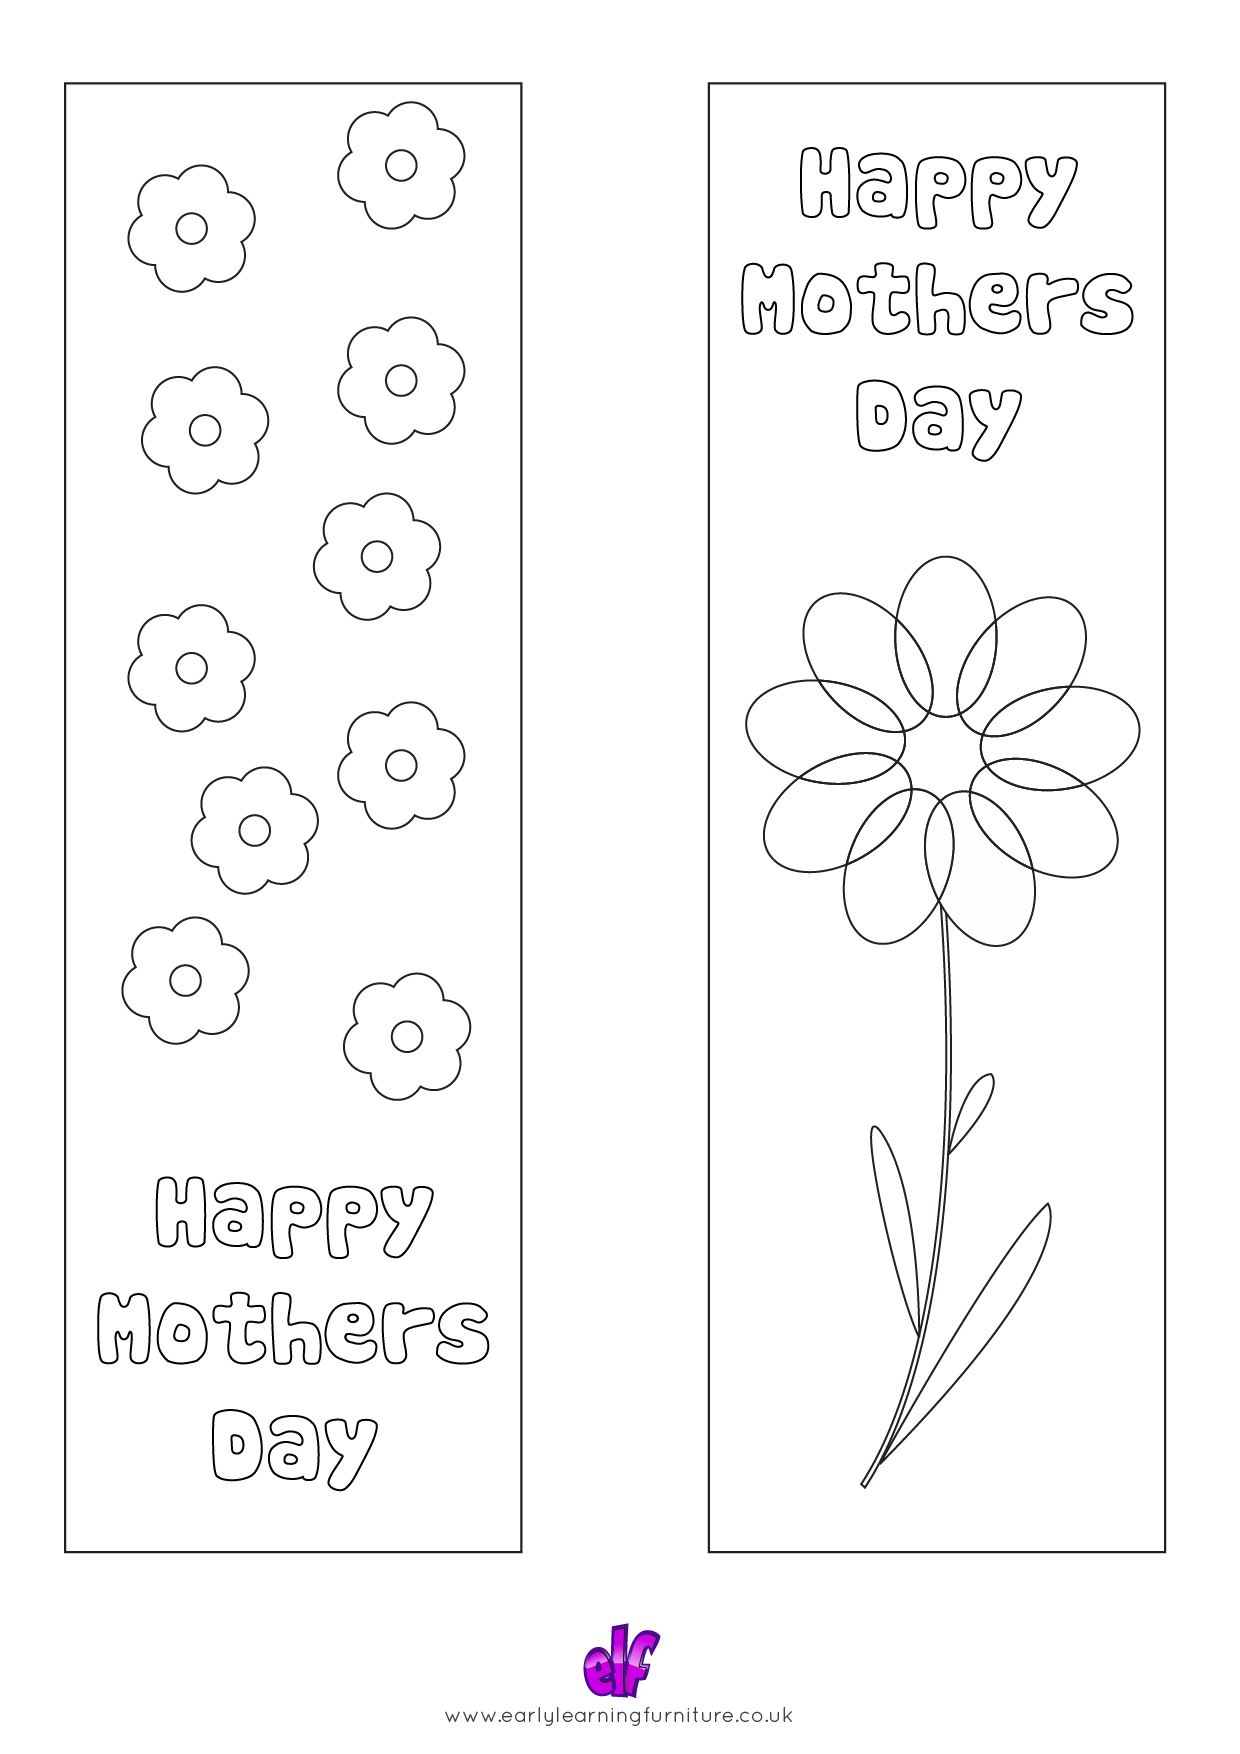 a-lively-hope-mothers-day-printable-bookmarks-free-coloring-pages-of